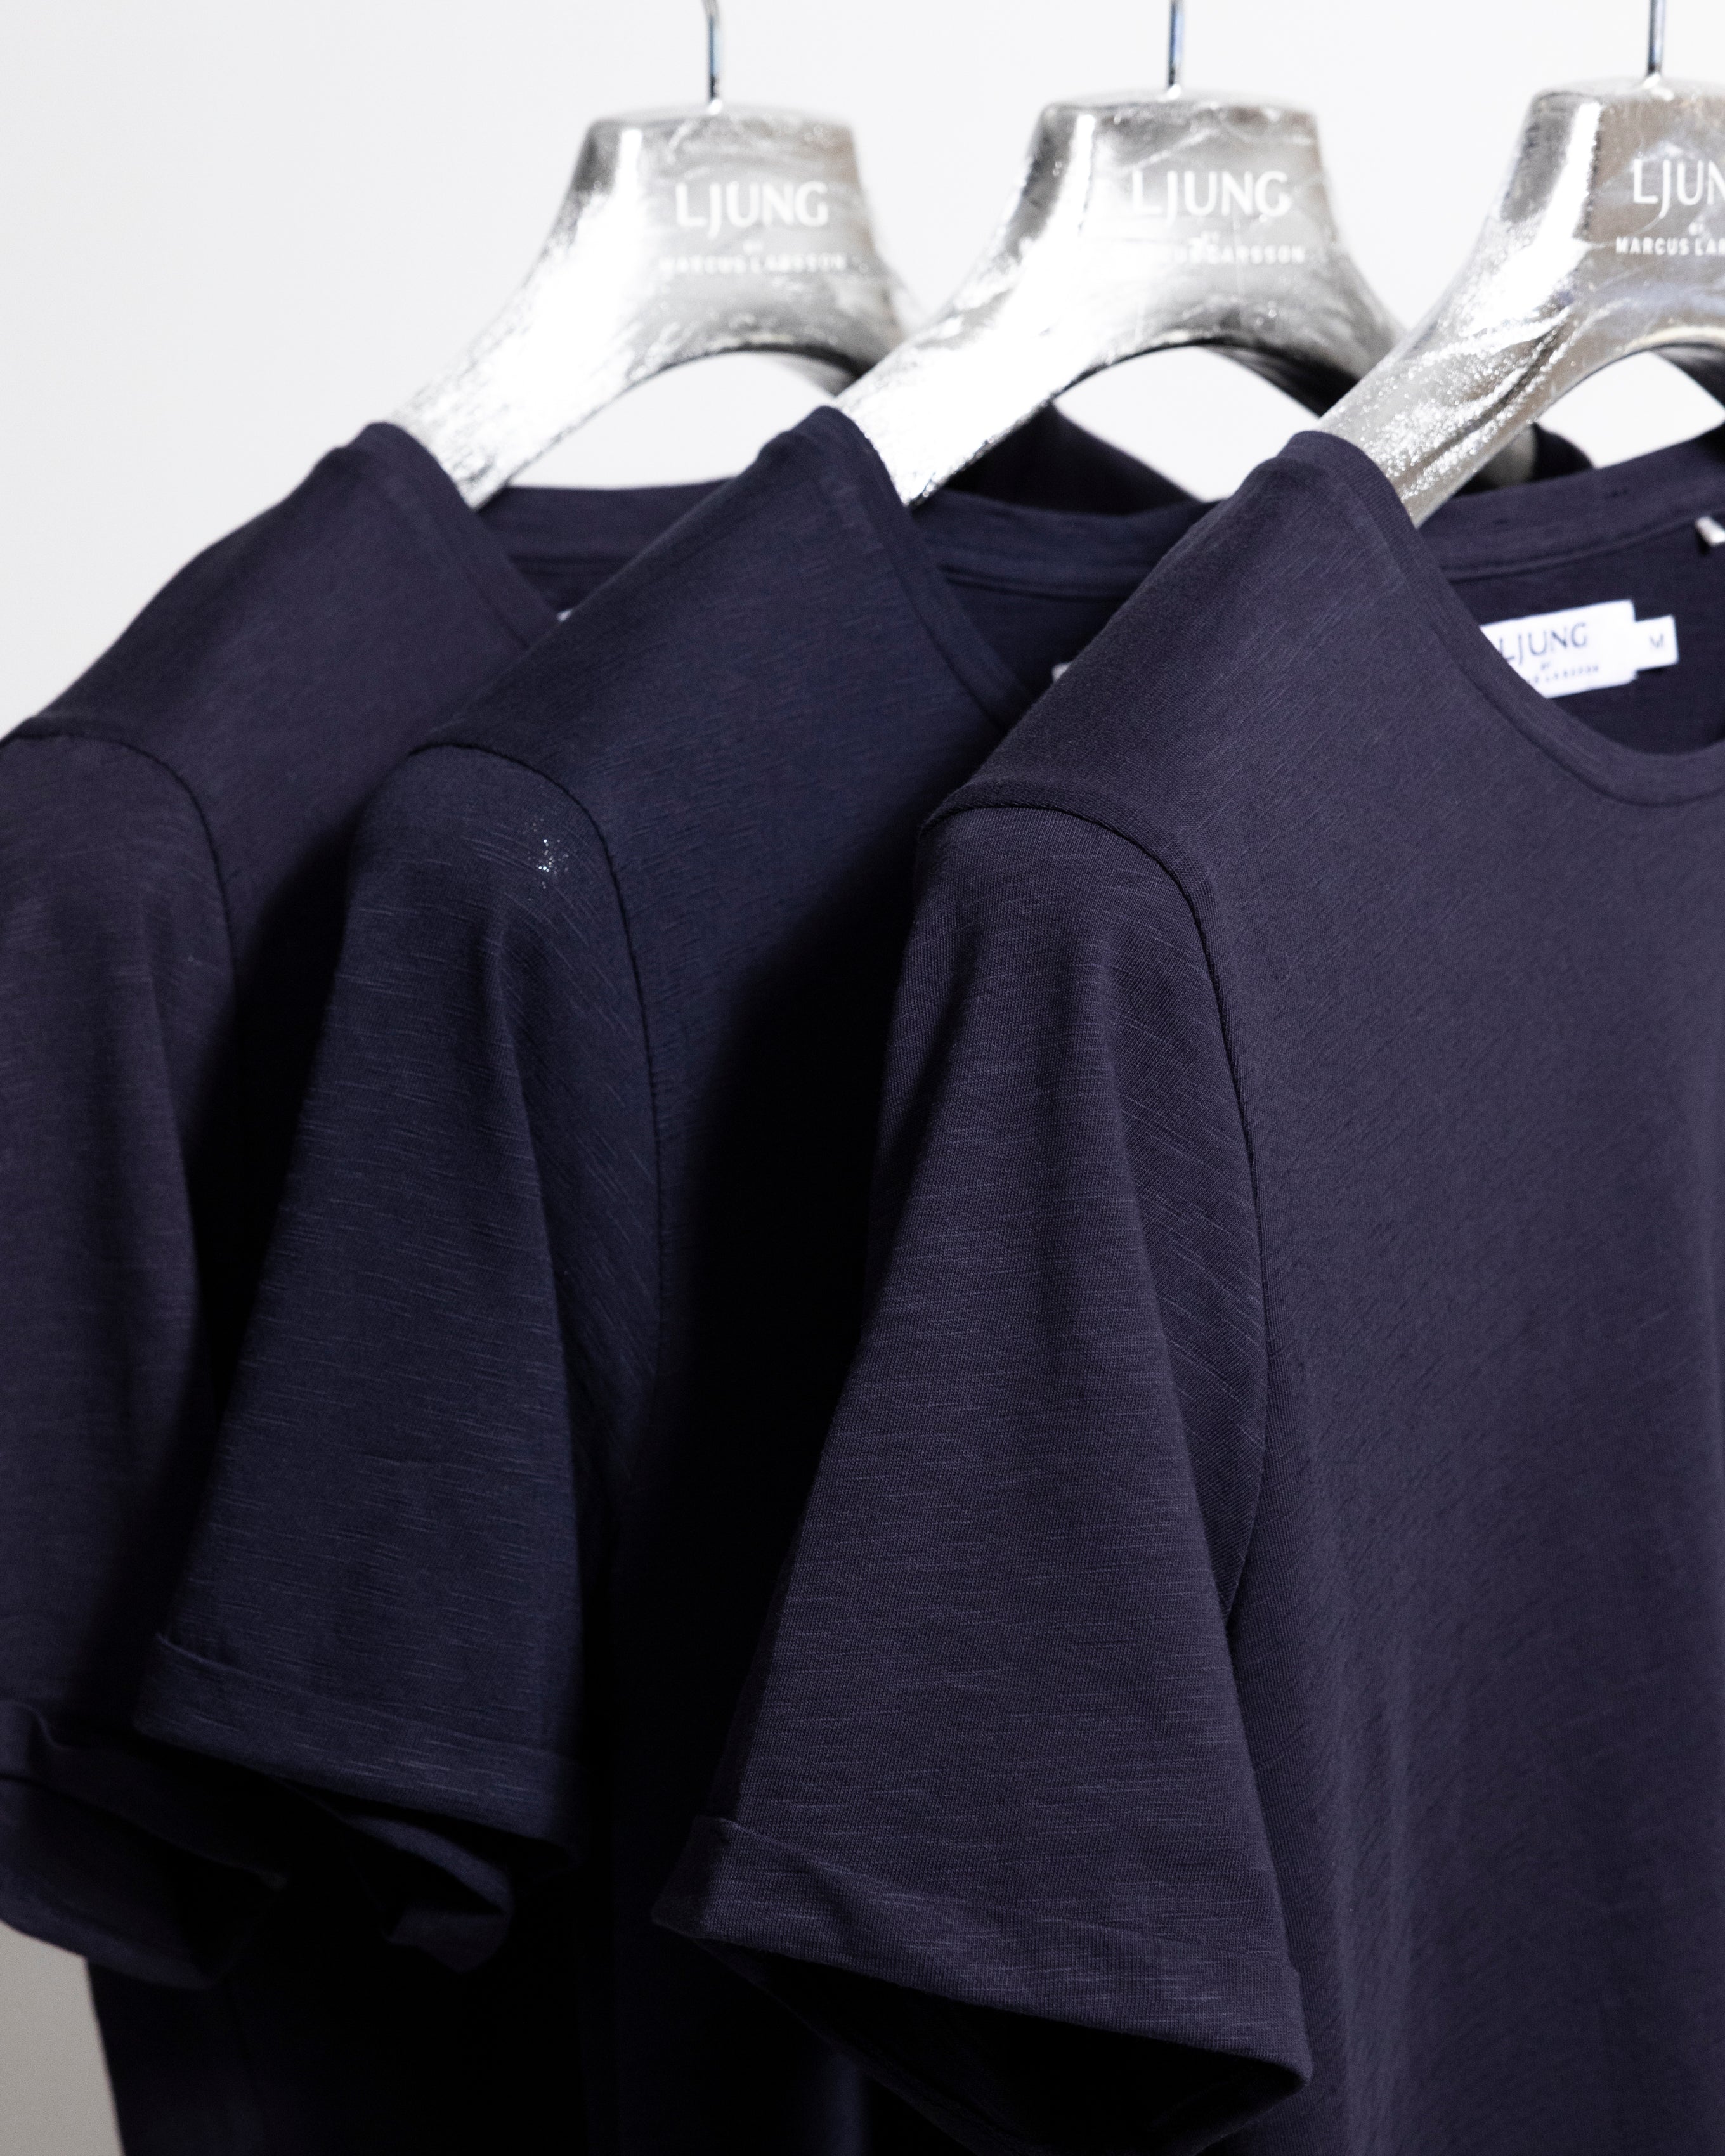 Core Tee 3 Pack - Navy-Ljung by Marcus Larsson